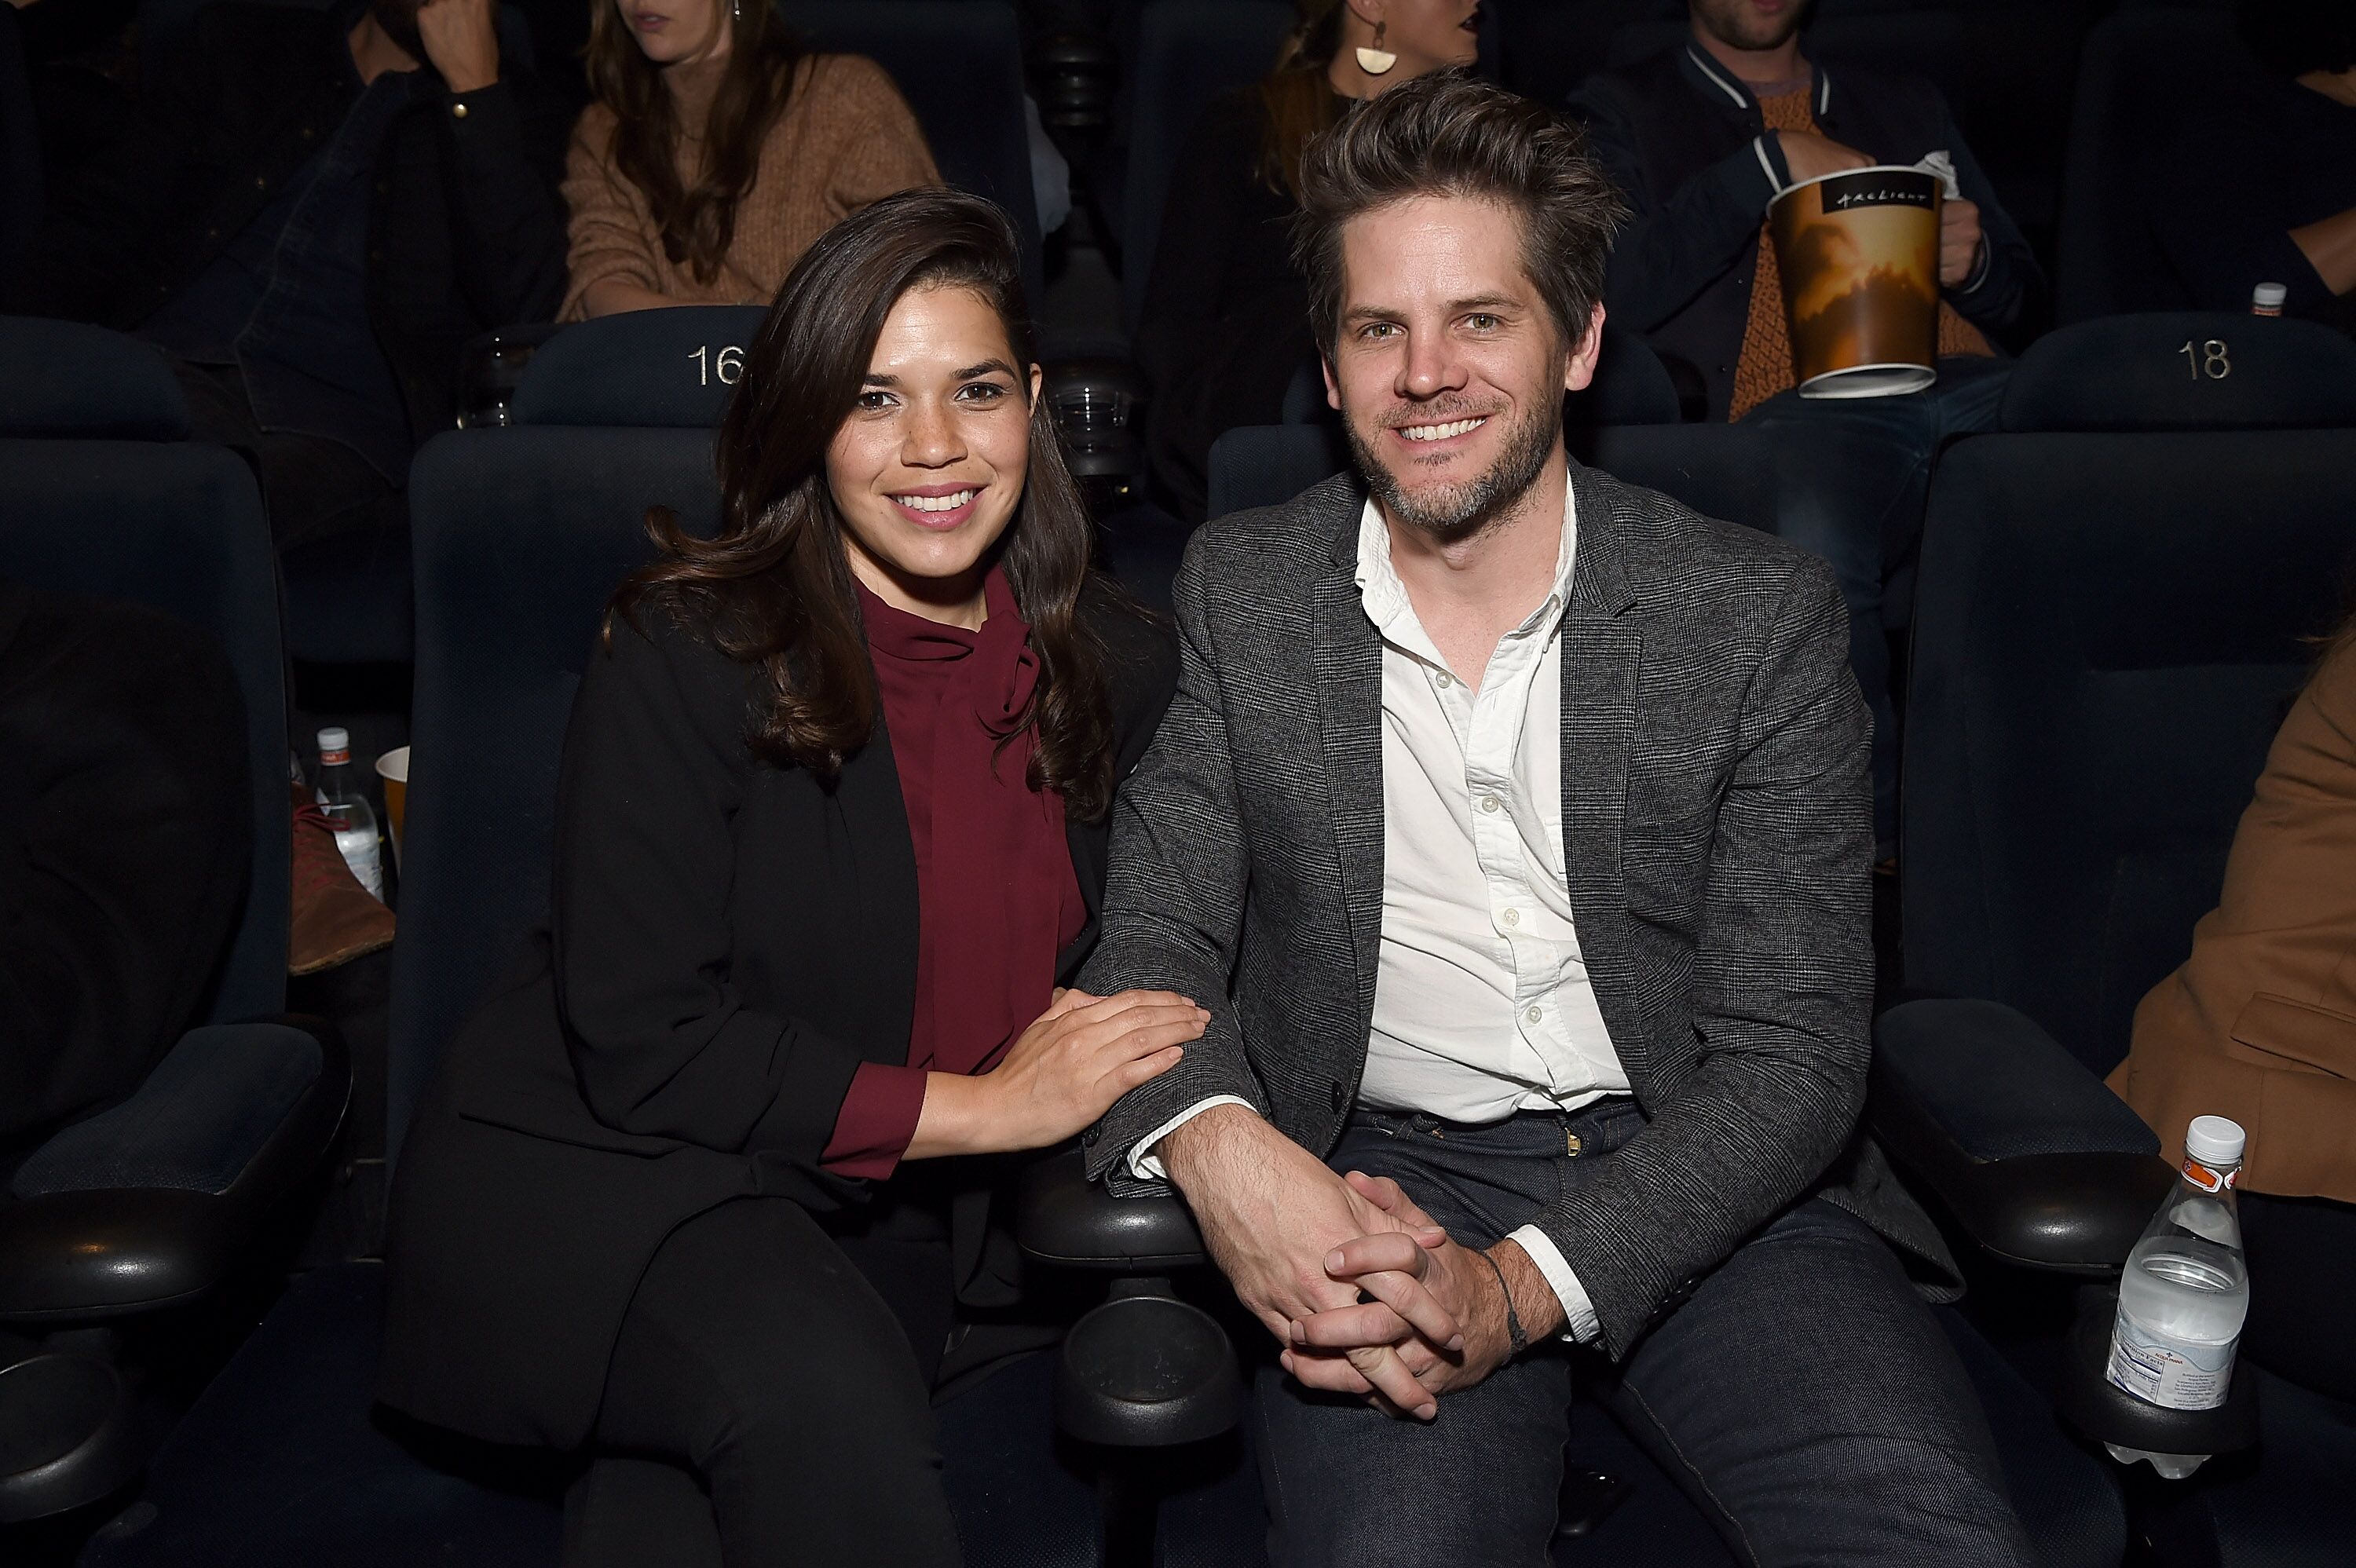 America Ferrera and Ryan Piers Williams at the Los Angeles premiere of 'Vox Lux' in 2018 | Source: Getty Images